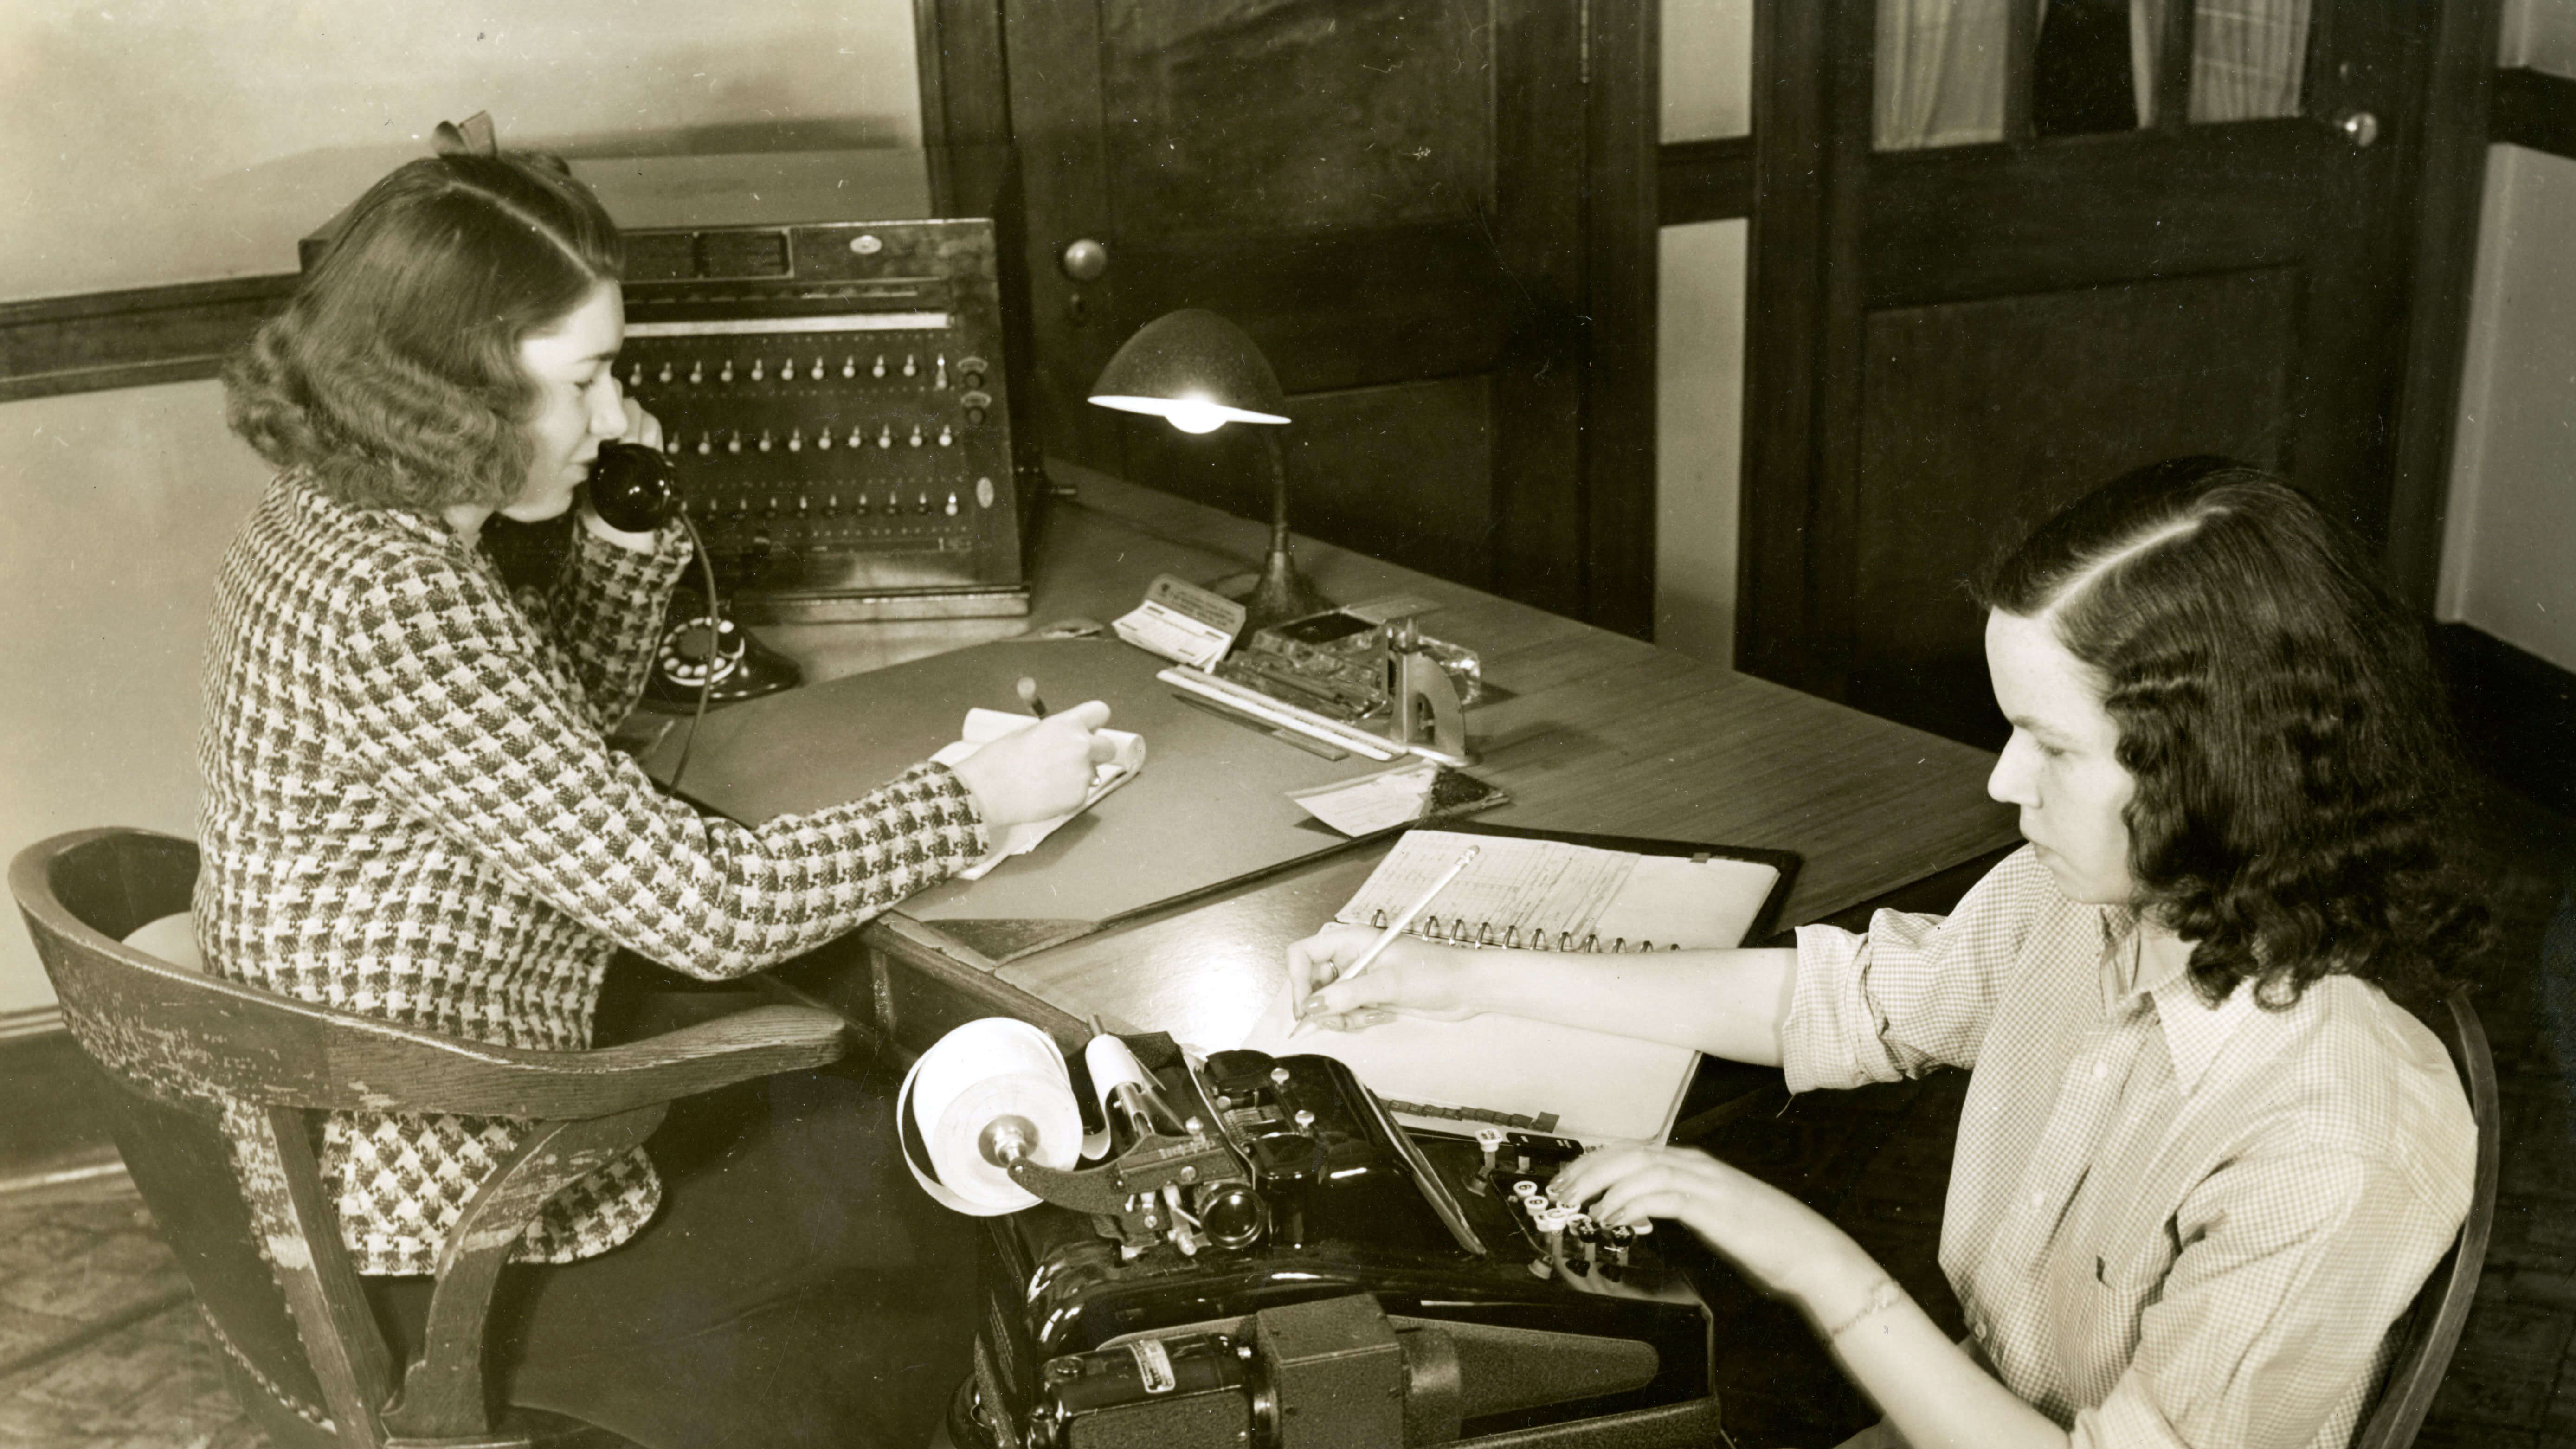 Two women sitting at a desk writing and working